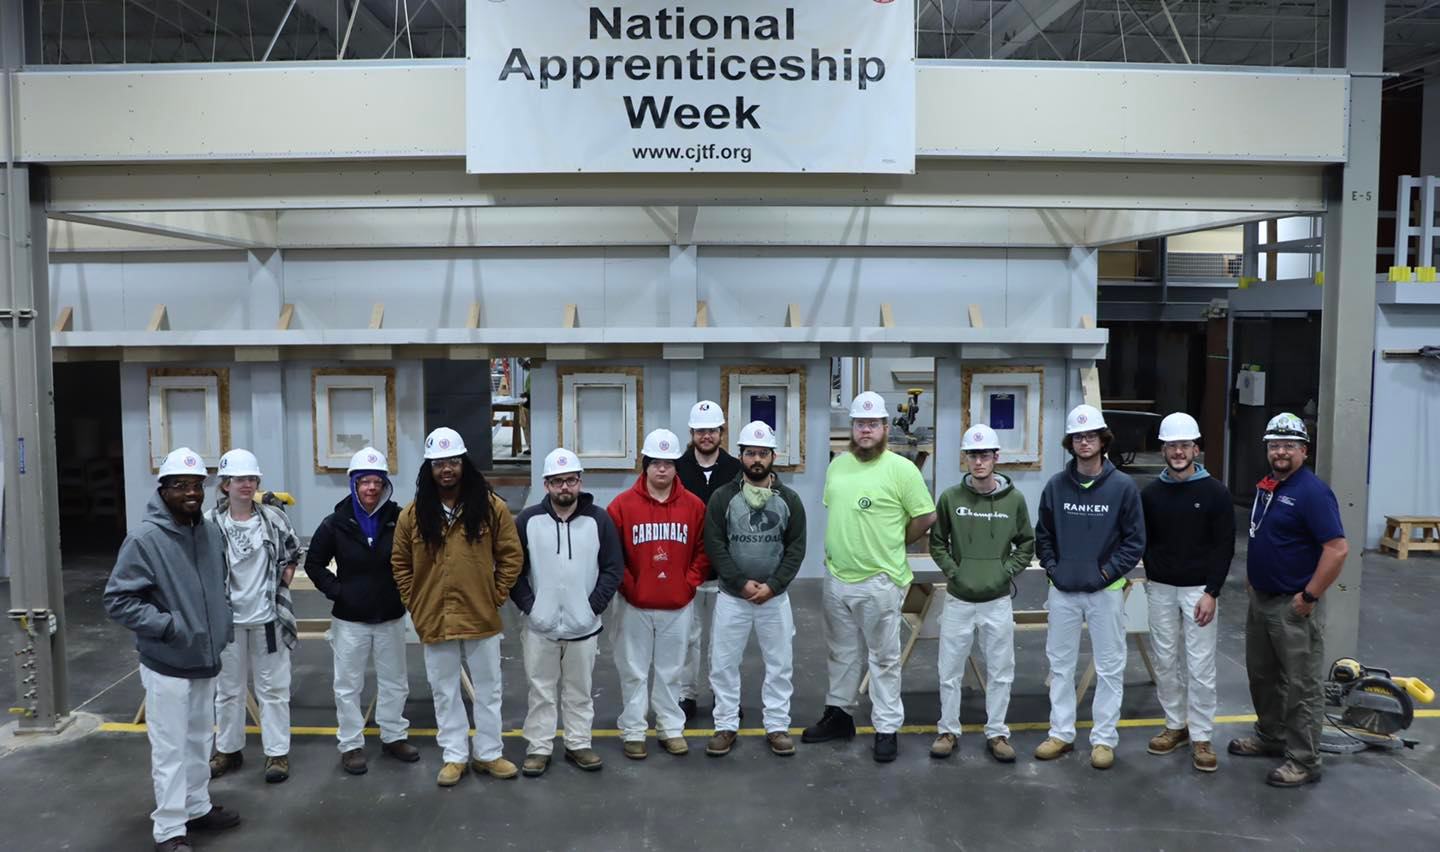 St Louis carpenters pose together at National Apprenticeship week